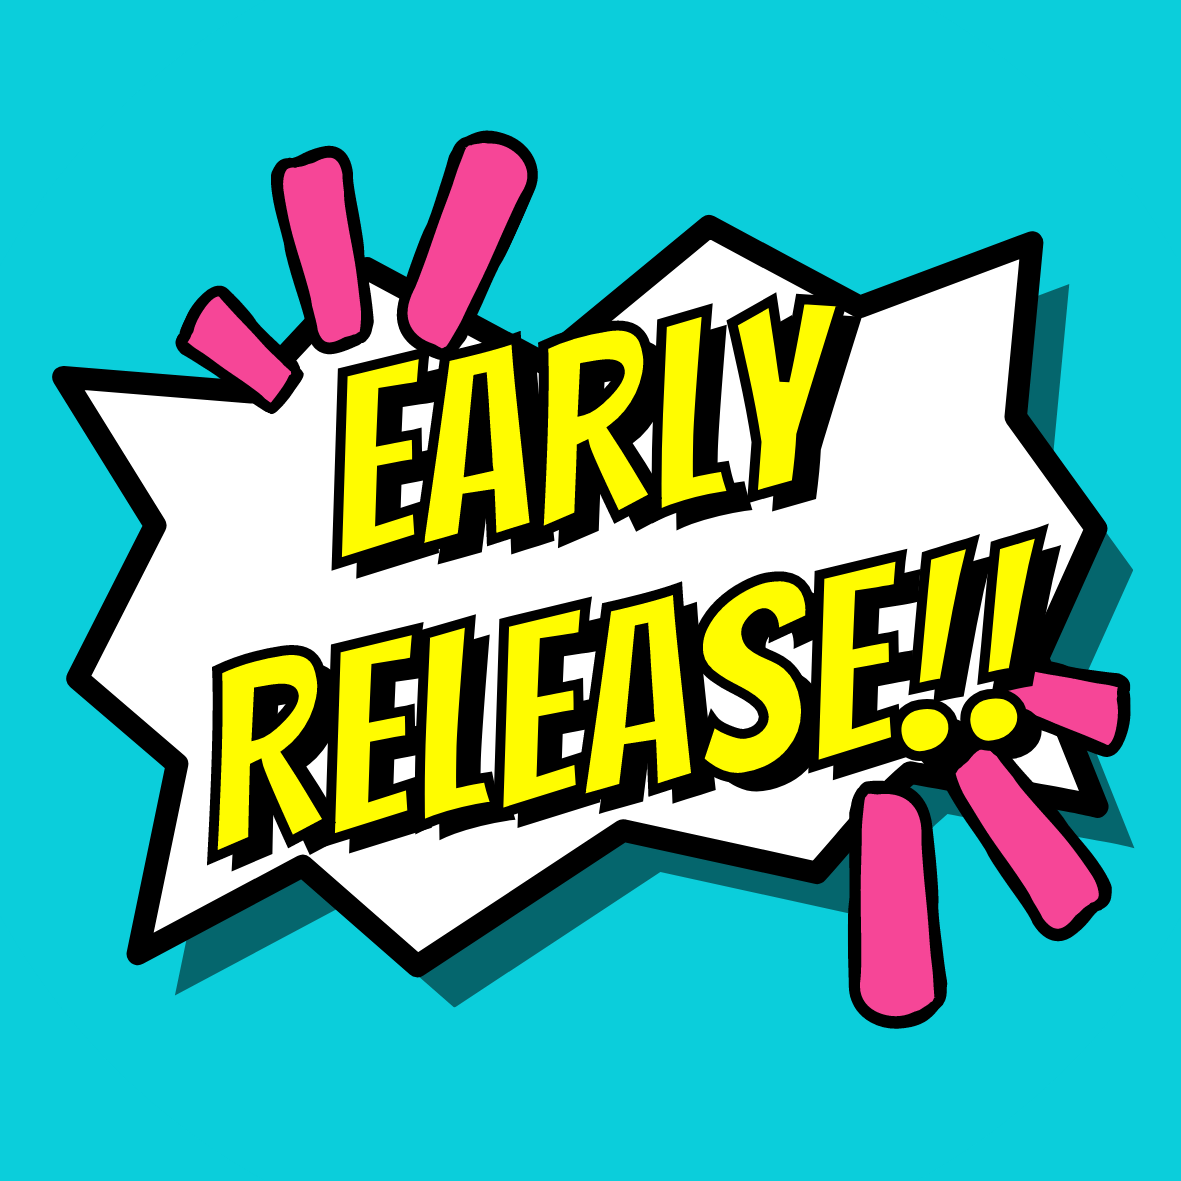 The words "Early release" in a comic book style 